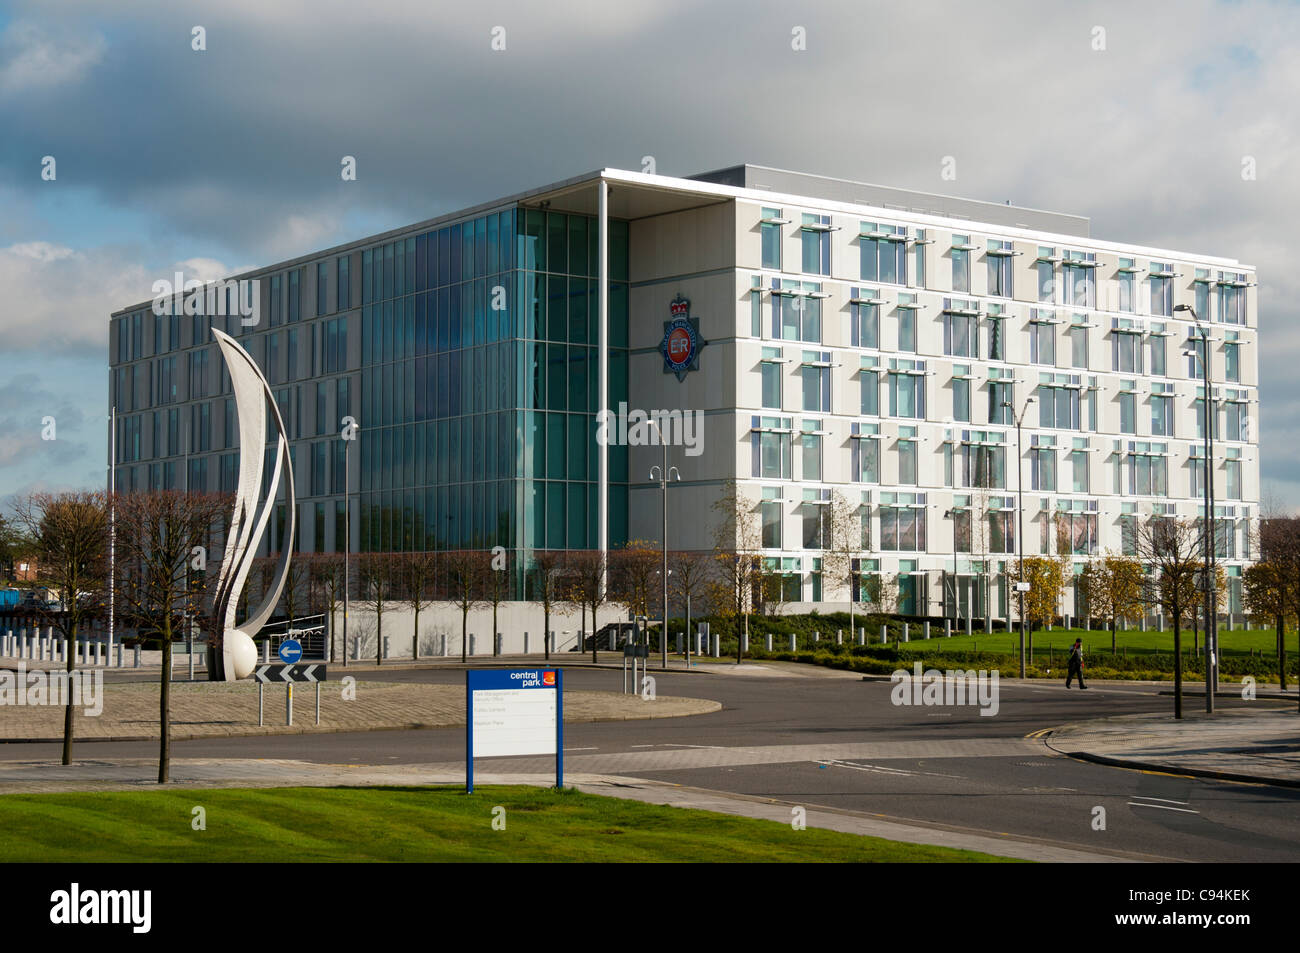 Greater Manchester Police Authority headquarters, Central Park, Newton Heath, Manchester, England, UK. Architects: Aedas, 2011. Stock Photo